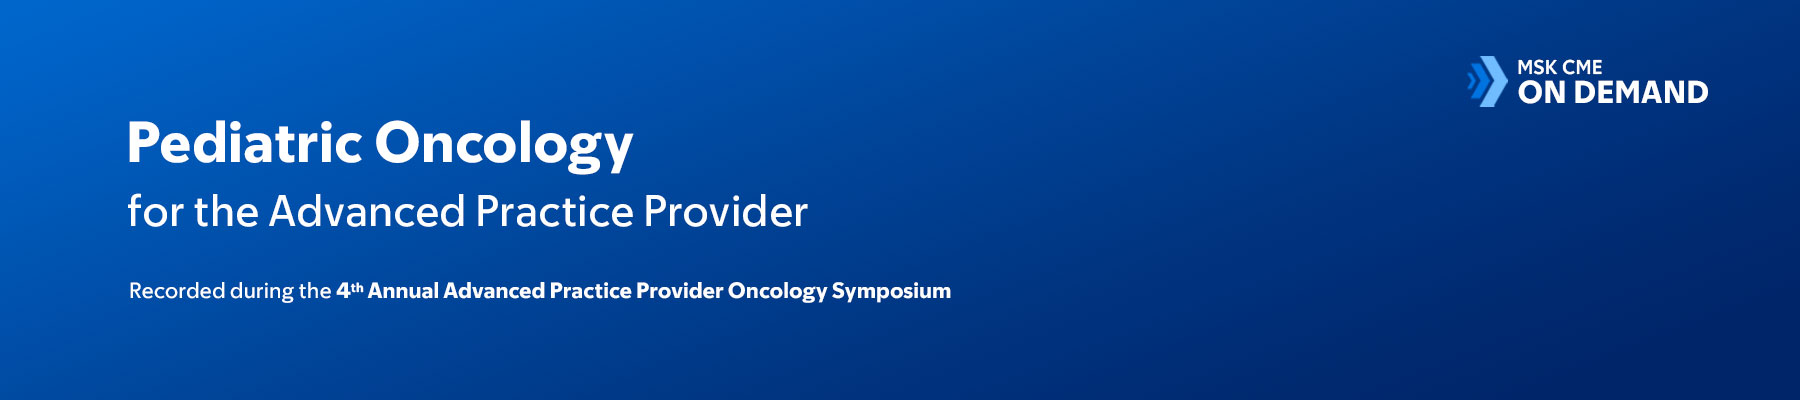 Pediatric Oncology for the Advanced Practice Provider - On Demand Banner